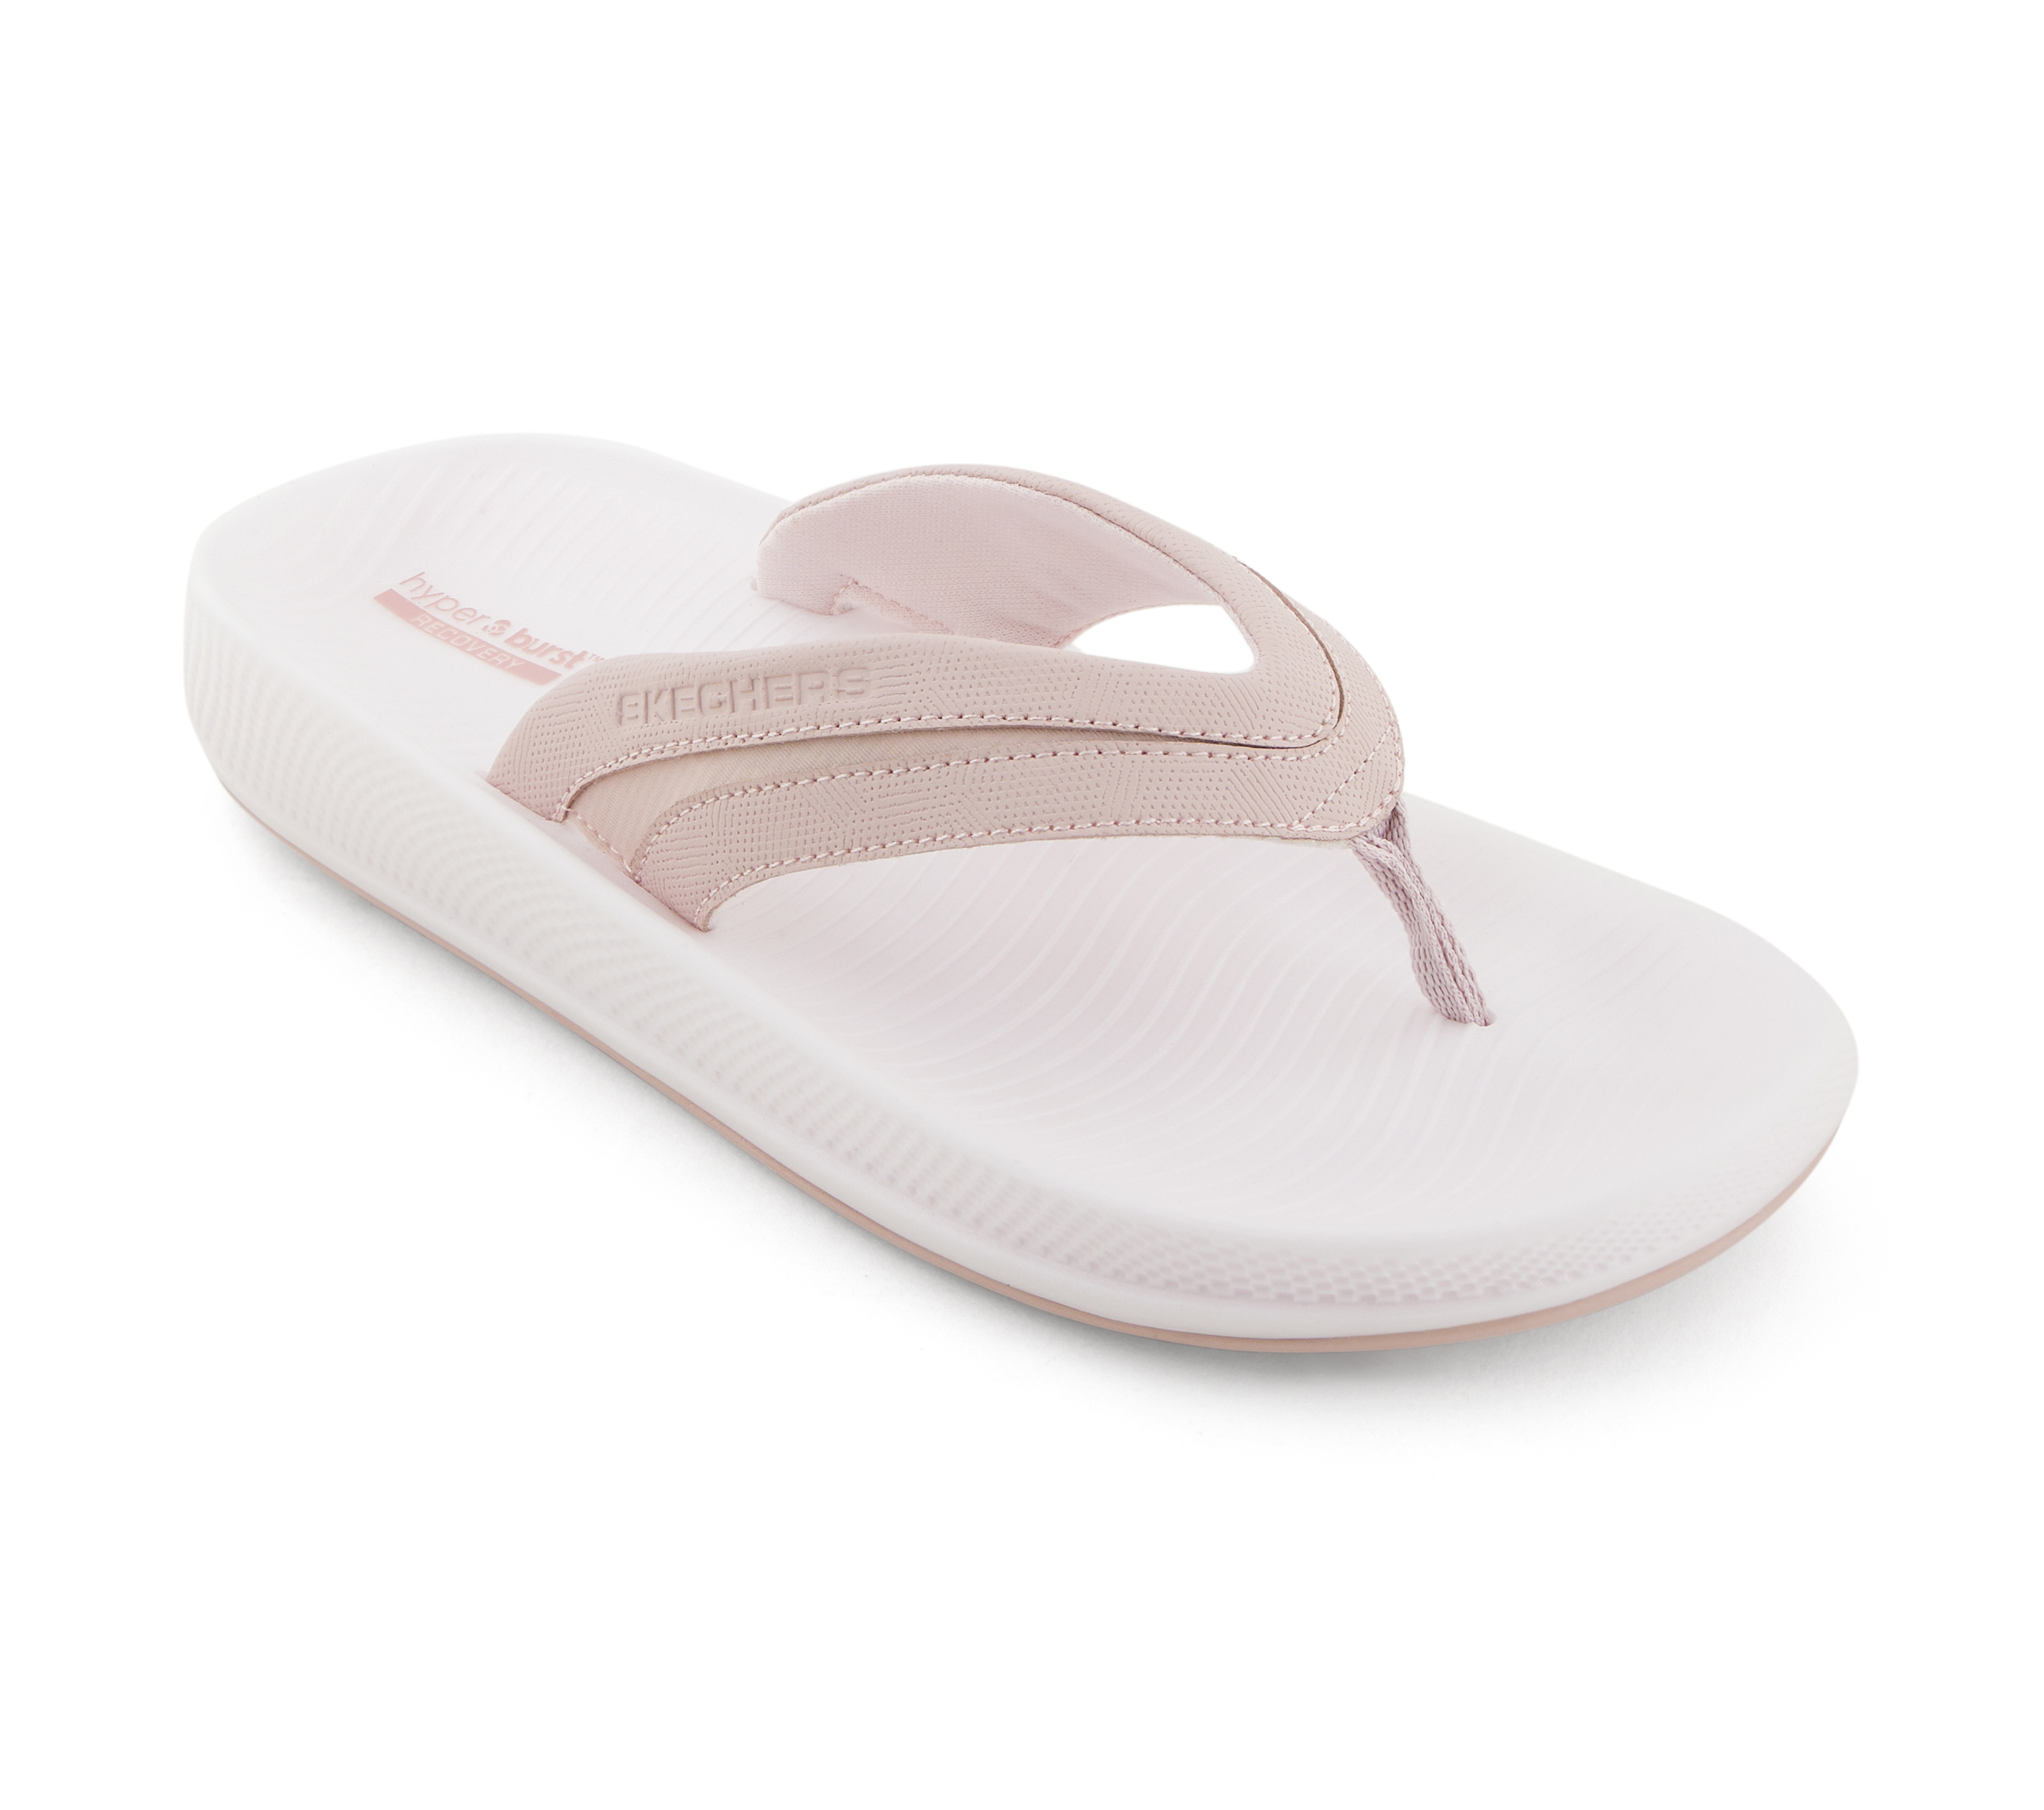 HYPER SLIDE, LLLIGHT PINK Footwear Lateral View